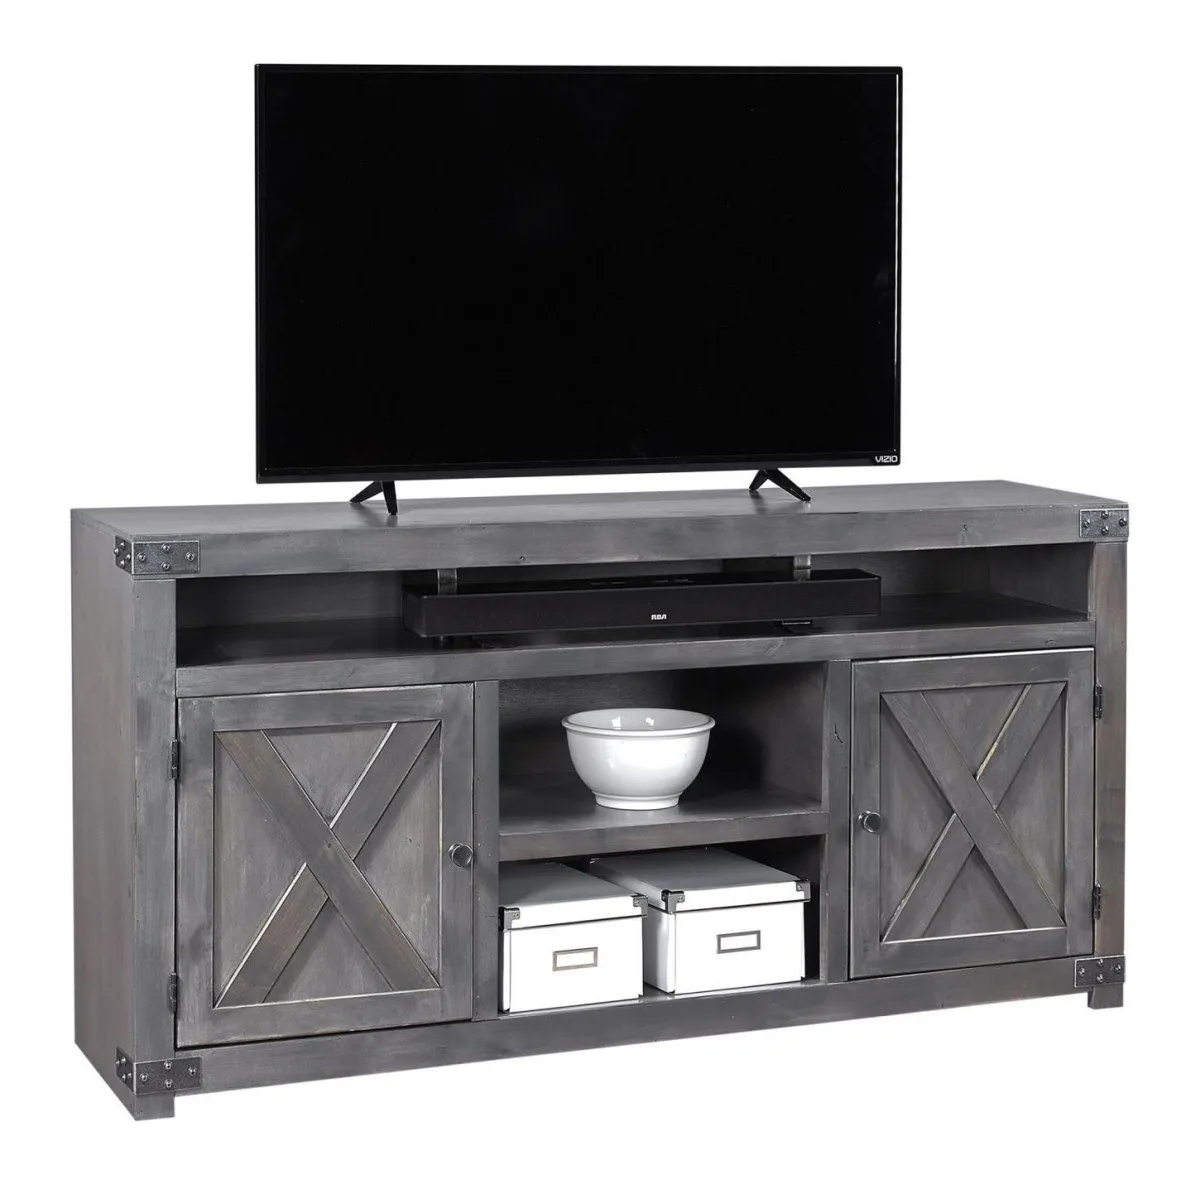 URBAN FARMHOUSE 65 INCH FRUITWOOD FIREPLACE TV STAND CONSOLE